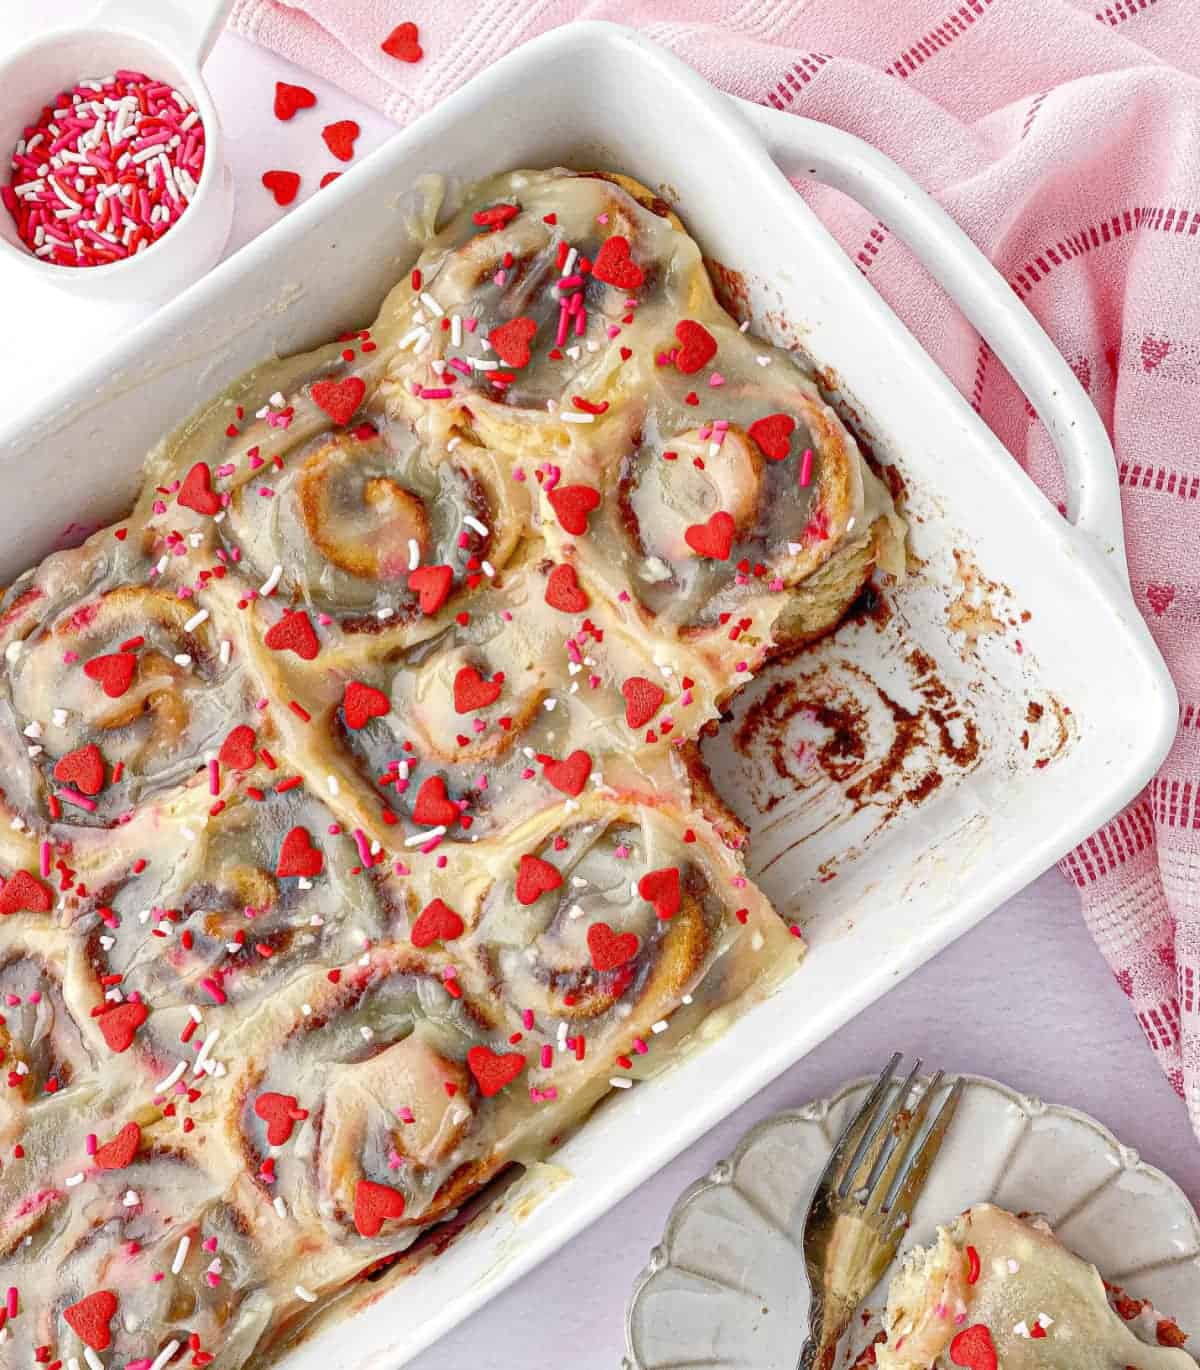 Top view of Funfetti Cinnamon Rolls with Valentine's Day Sprinkles on top.